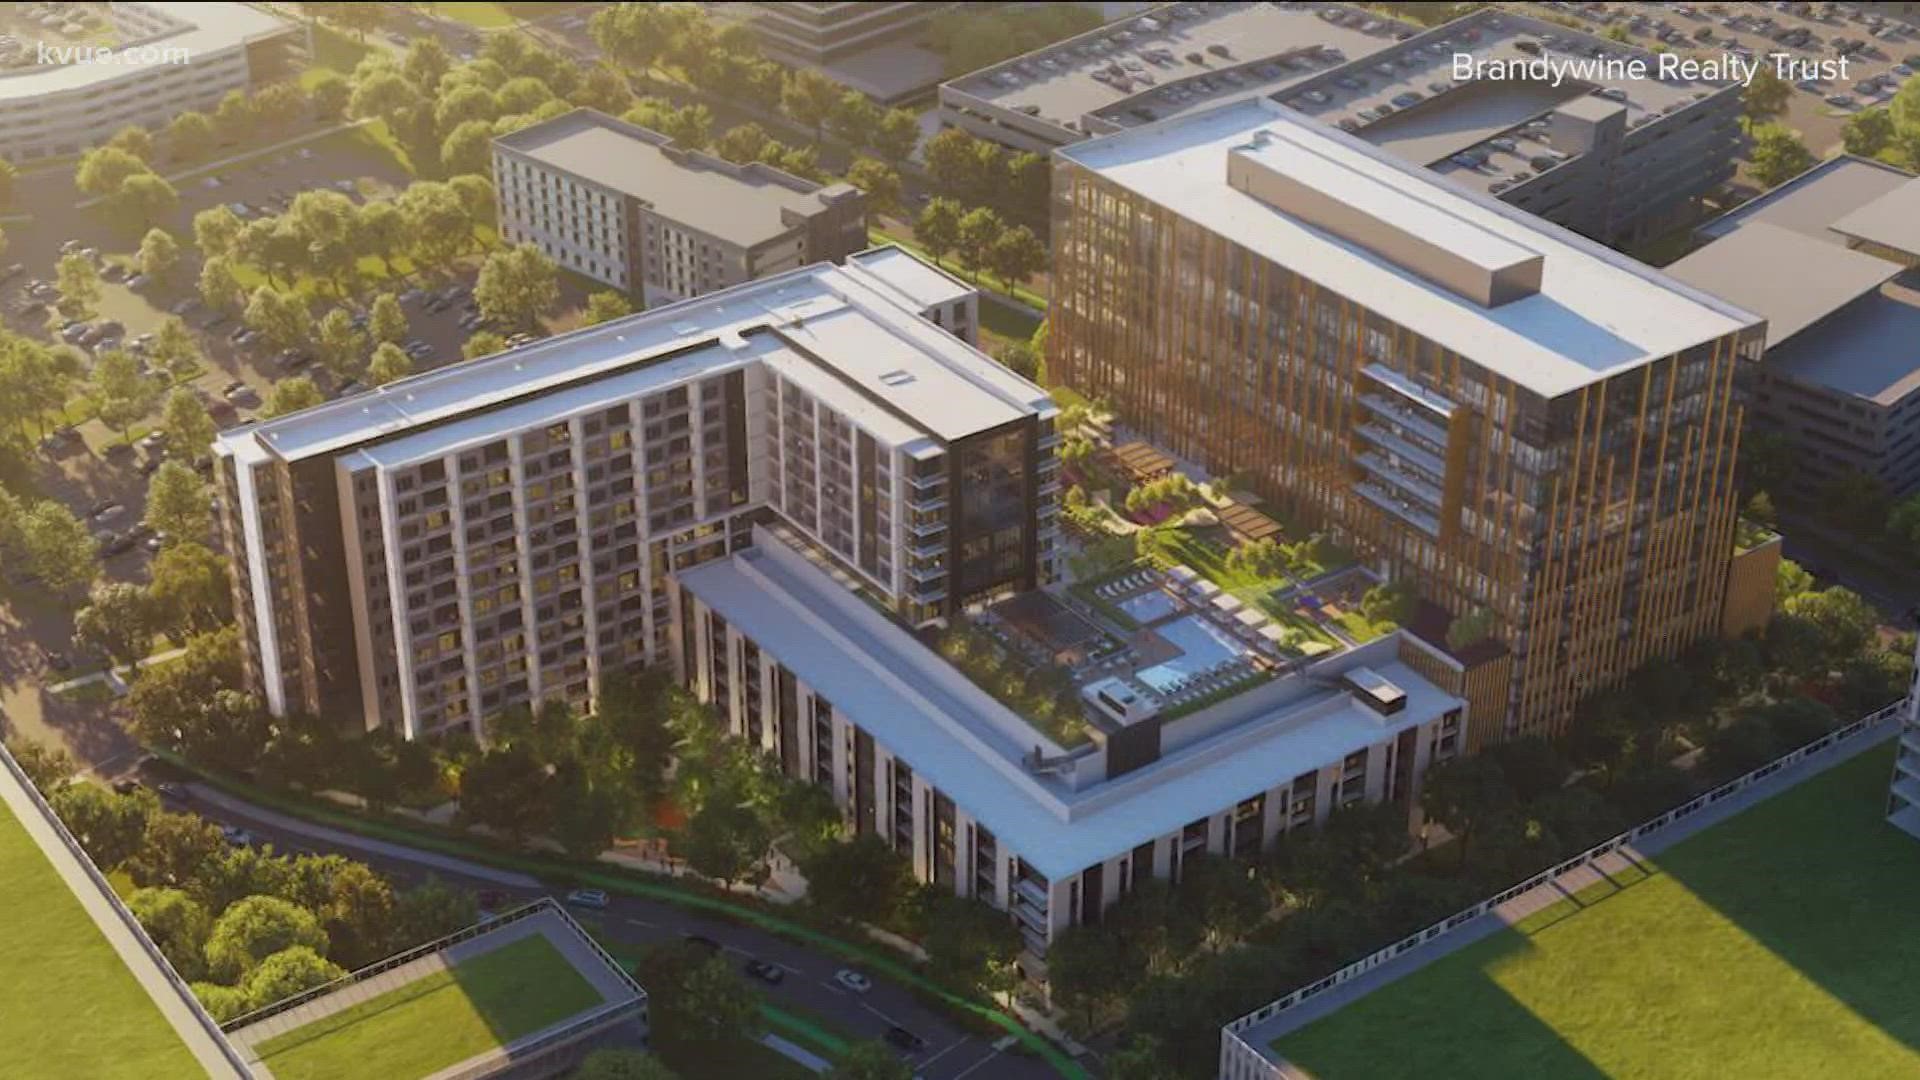 Construction has started on a $3 billion neighborhood in North Austin. KVUE's Bryce Newberry has the details on Uptown ATX.